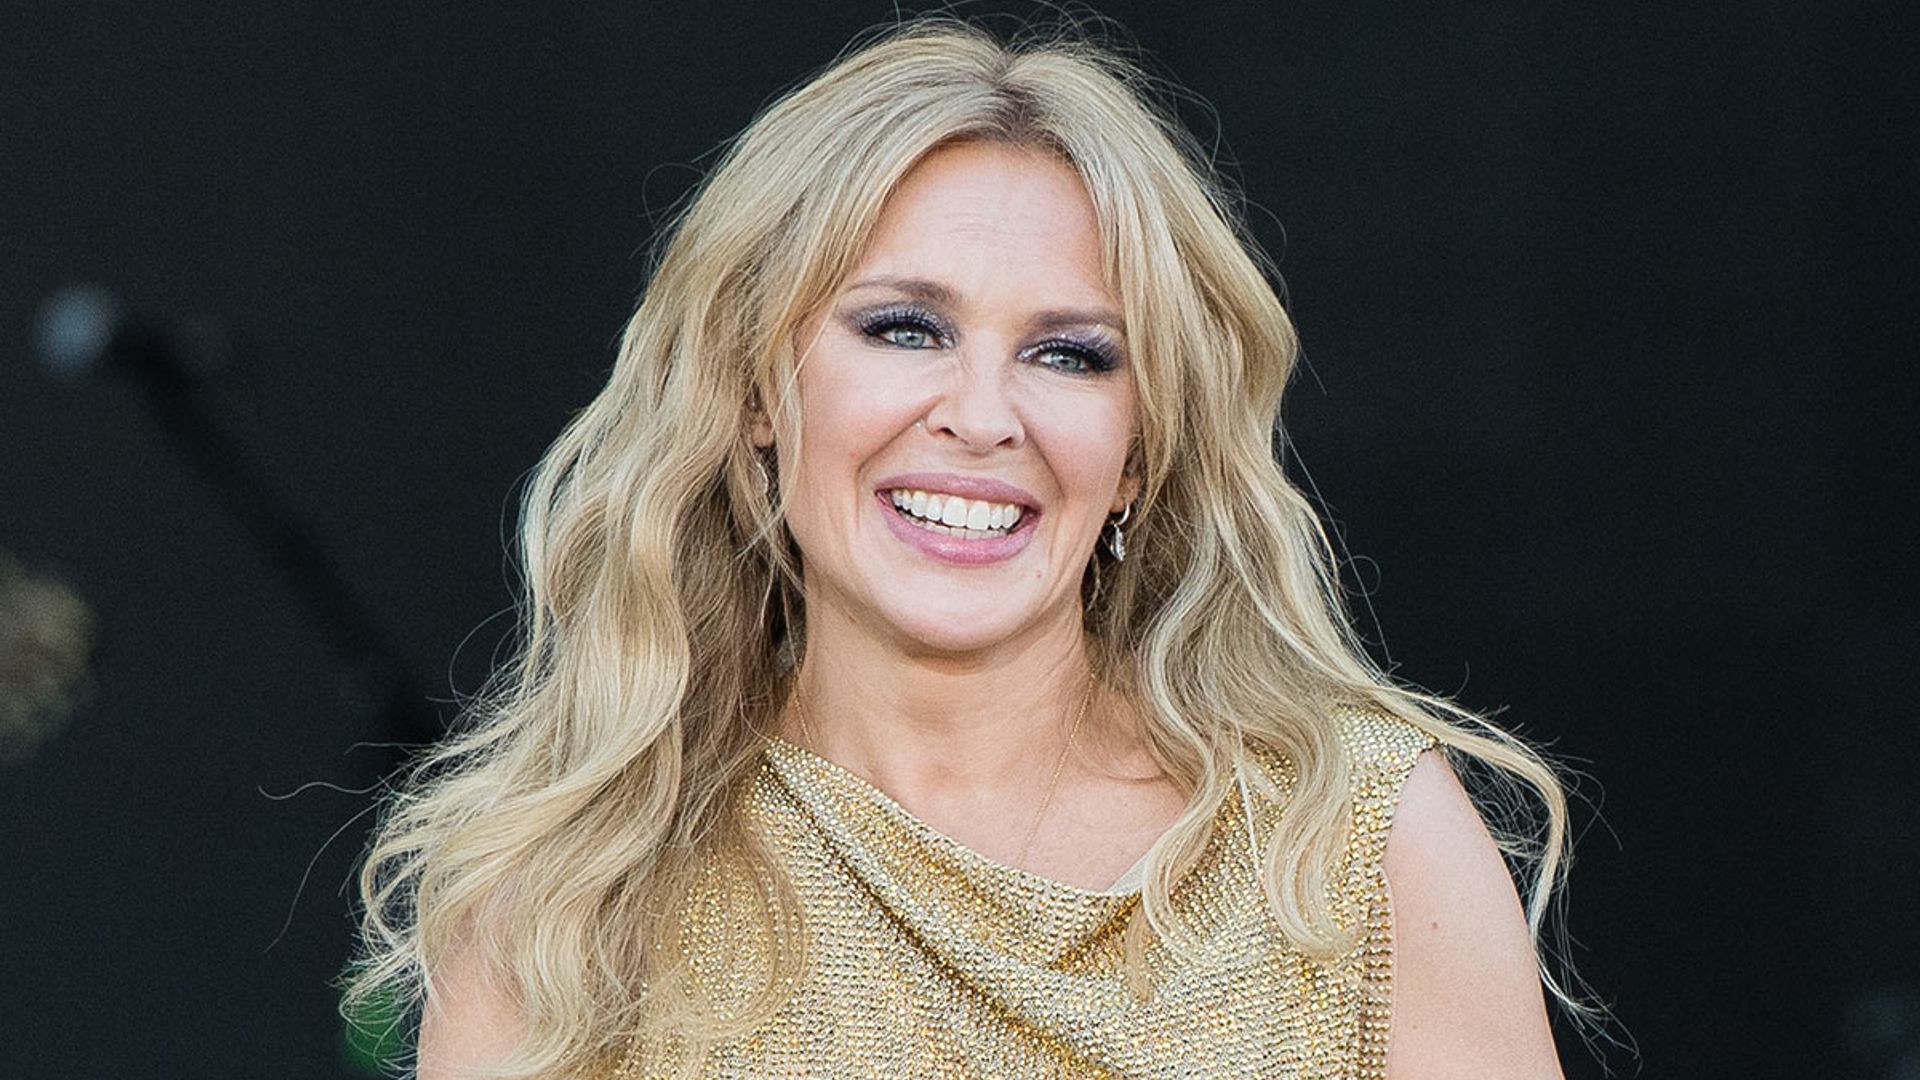 Kylie Minogue resembles a 'goddess' in gorgeous tulle dress